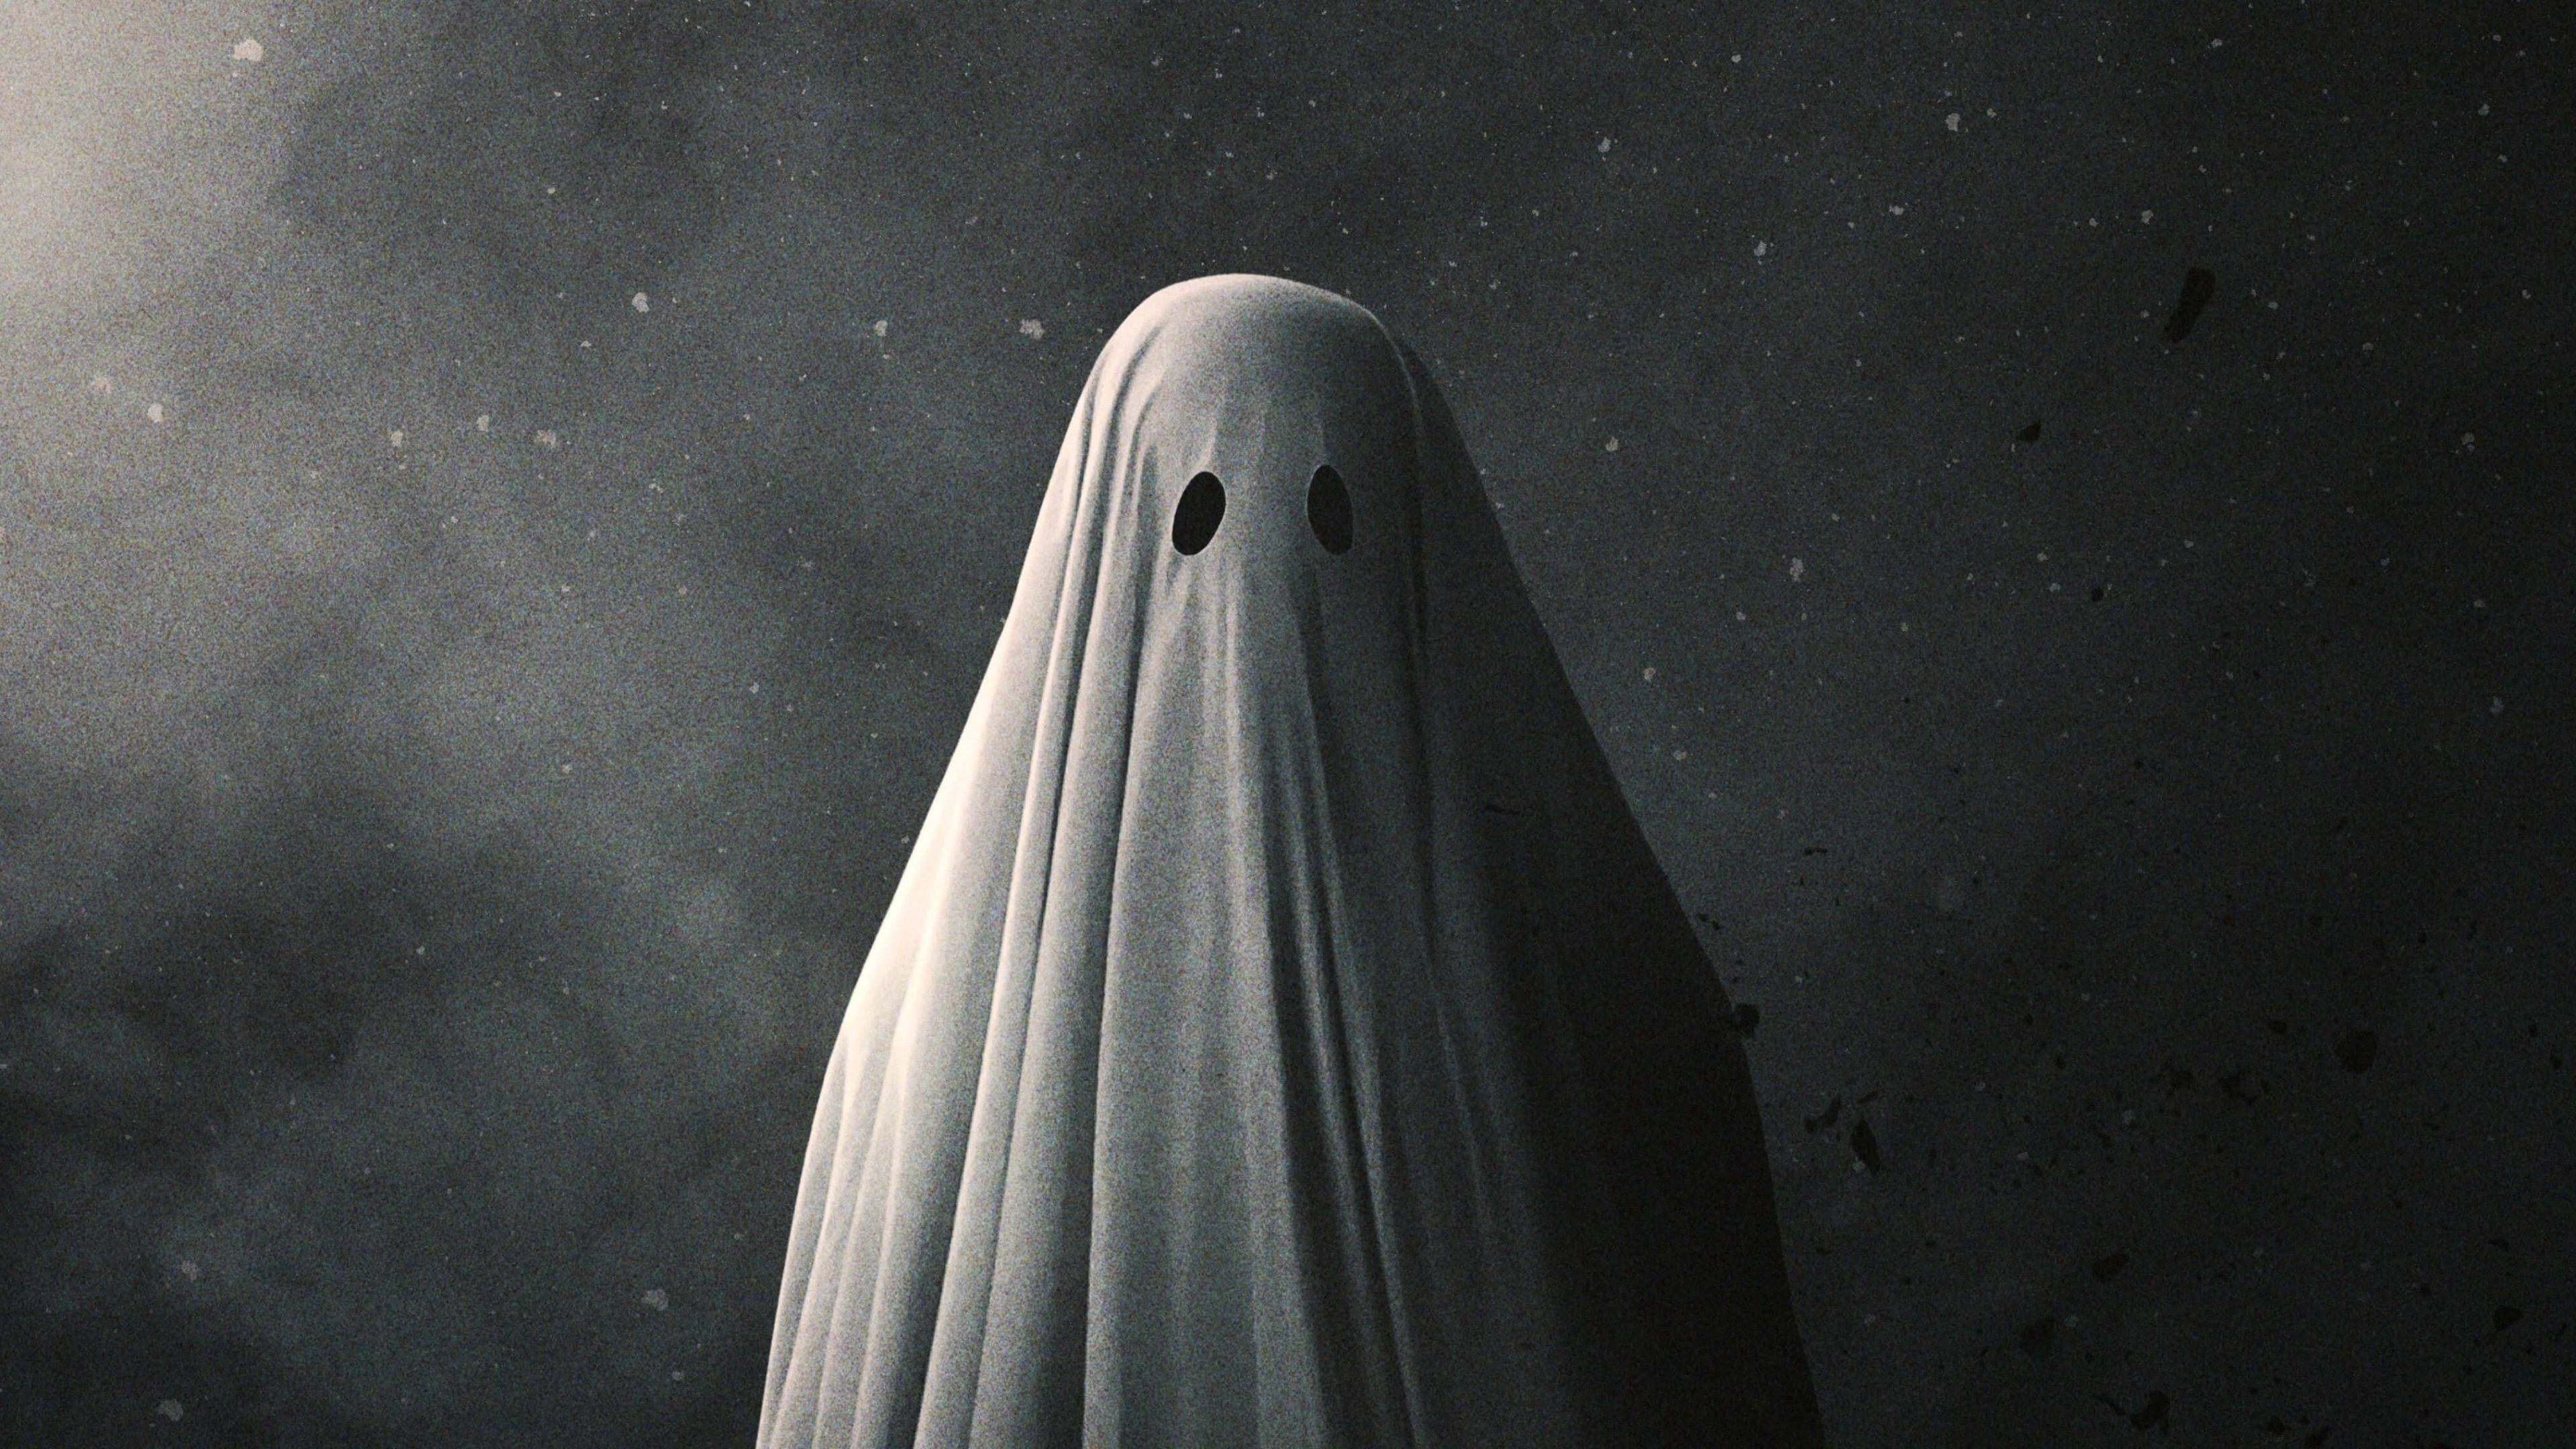 ghost hd wallpaper for mobile